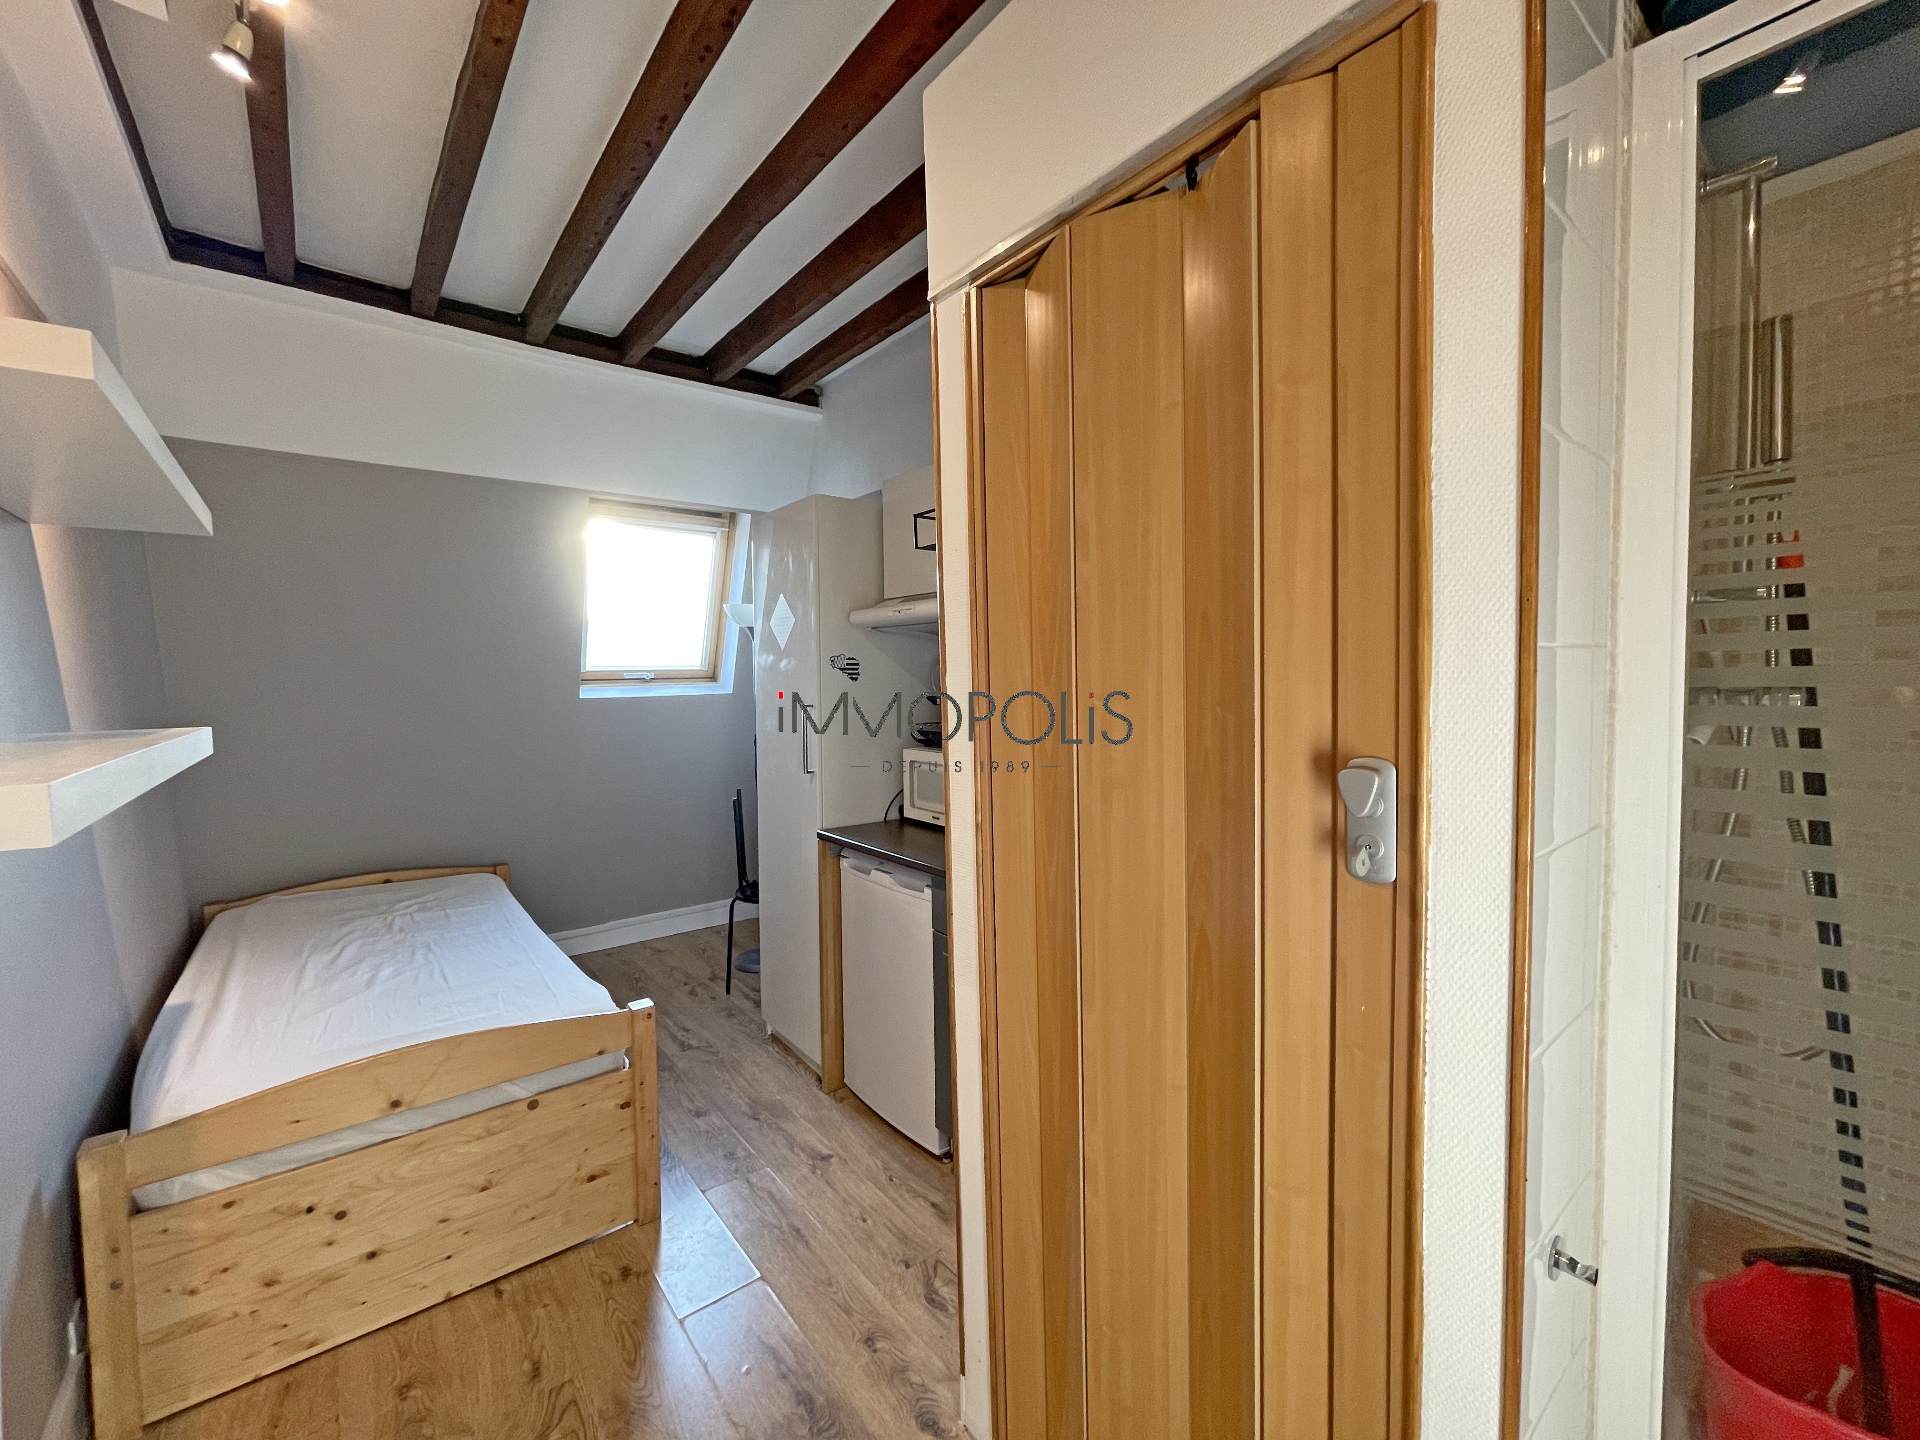 Europe district (rue Clapeyron in the 8th arrondissement), Legally laudable studio of 9.88 m² Law Carrez located in a beautiful well maintained building 4